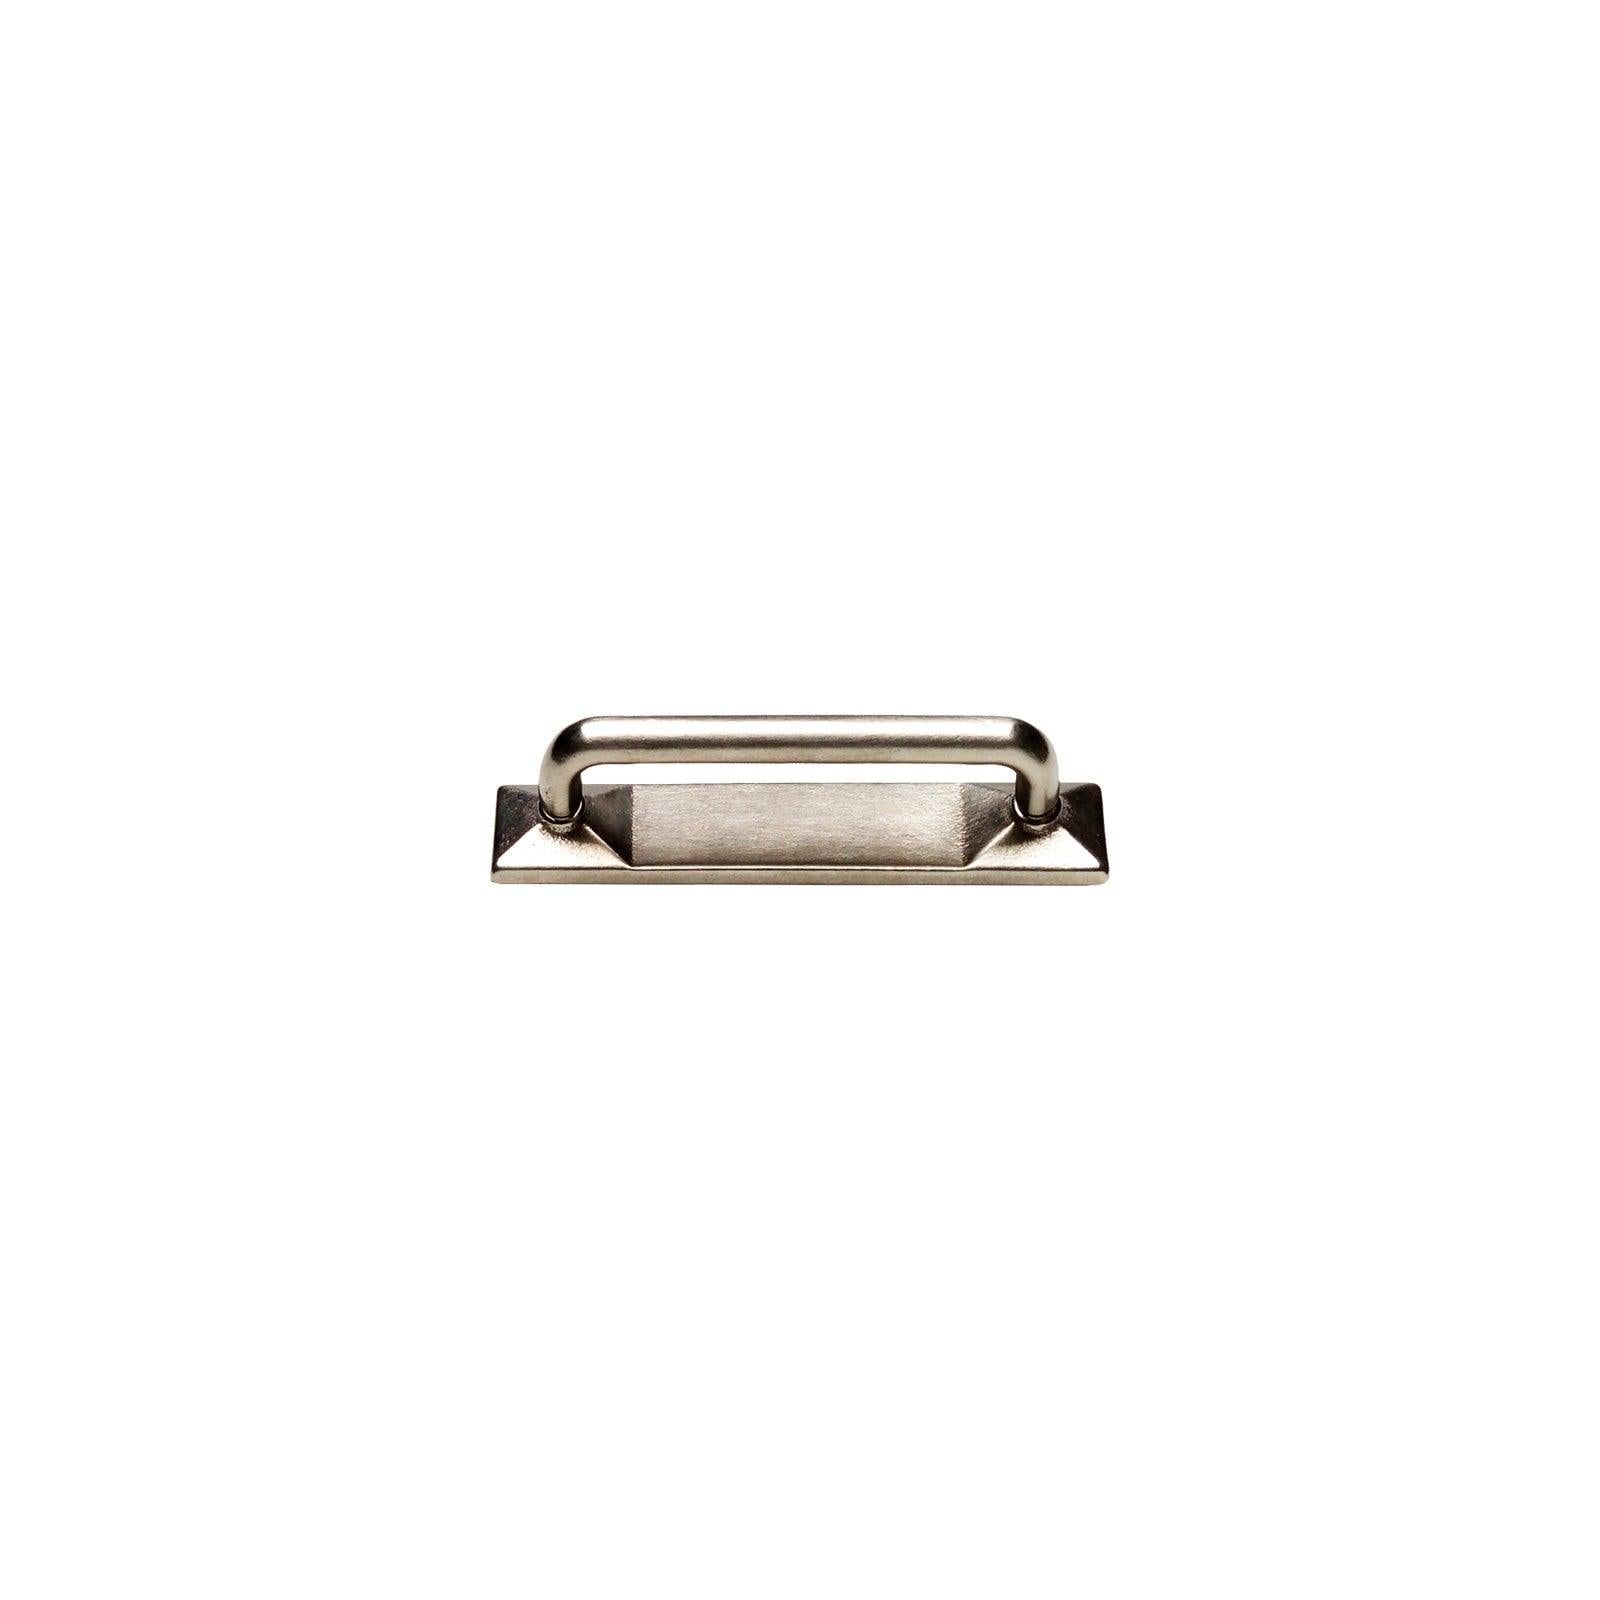 CK464 - 4" C-to-C Empire Cabinet Pull - {{ show.name }}